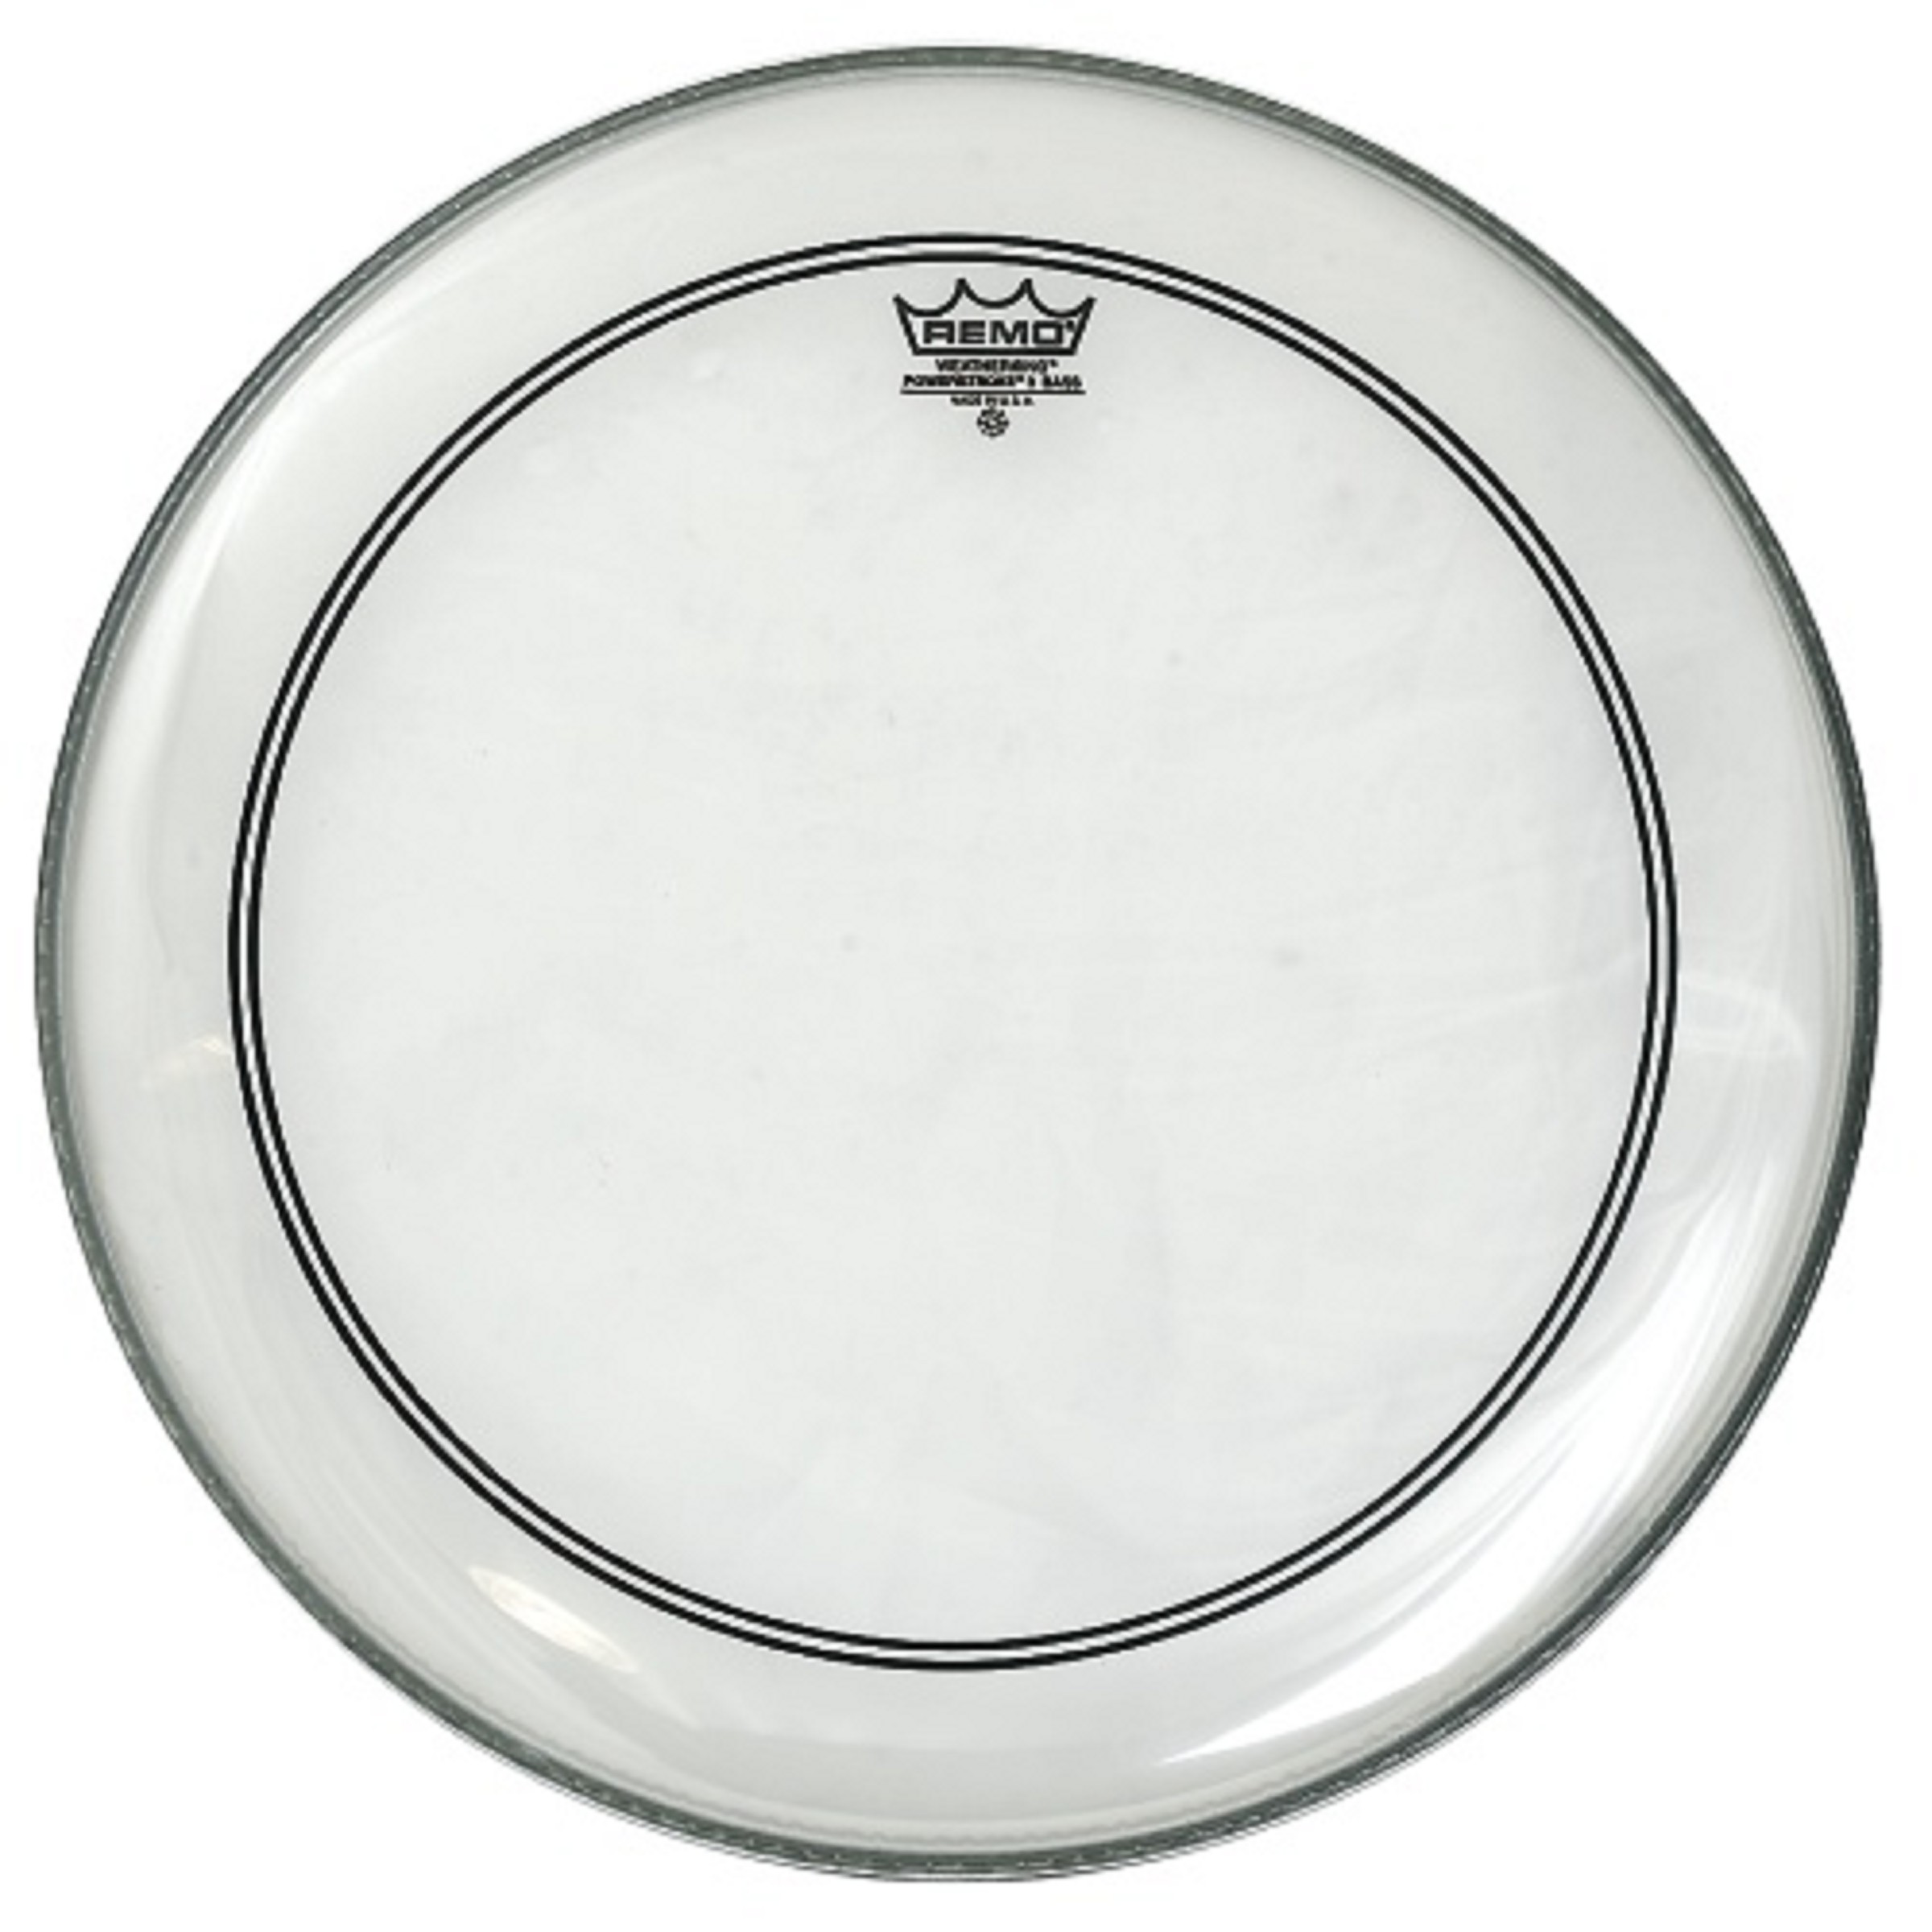 Remo Fell Powerstroke 3 22" Clear Bass Drum